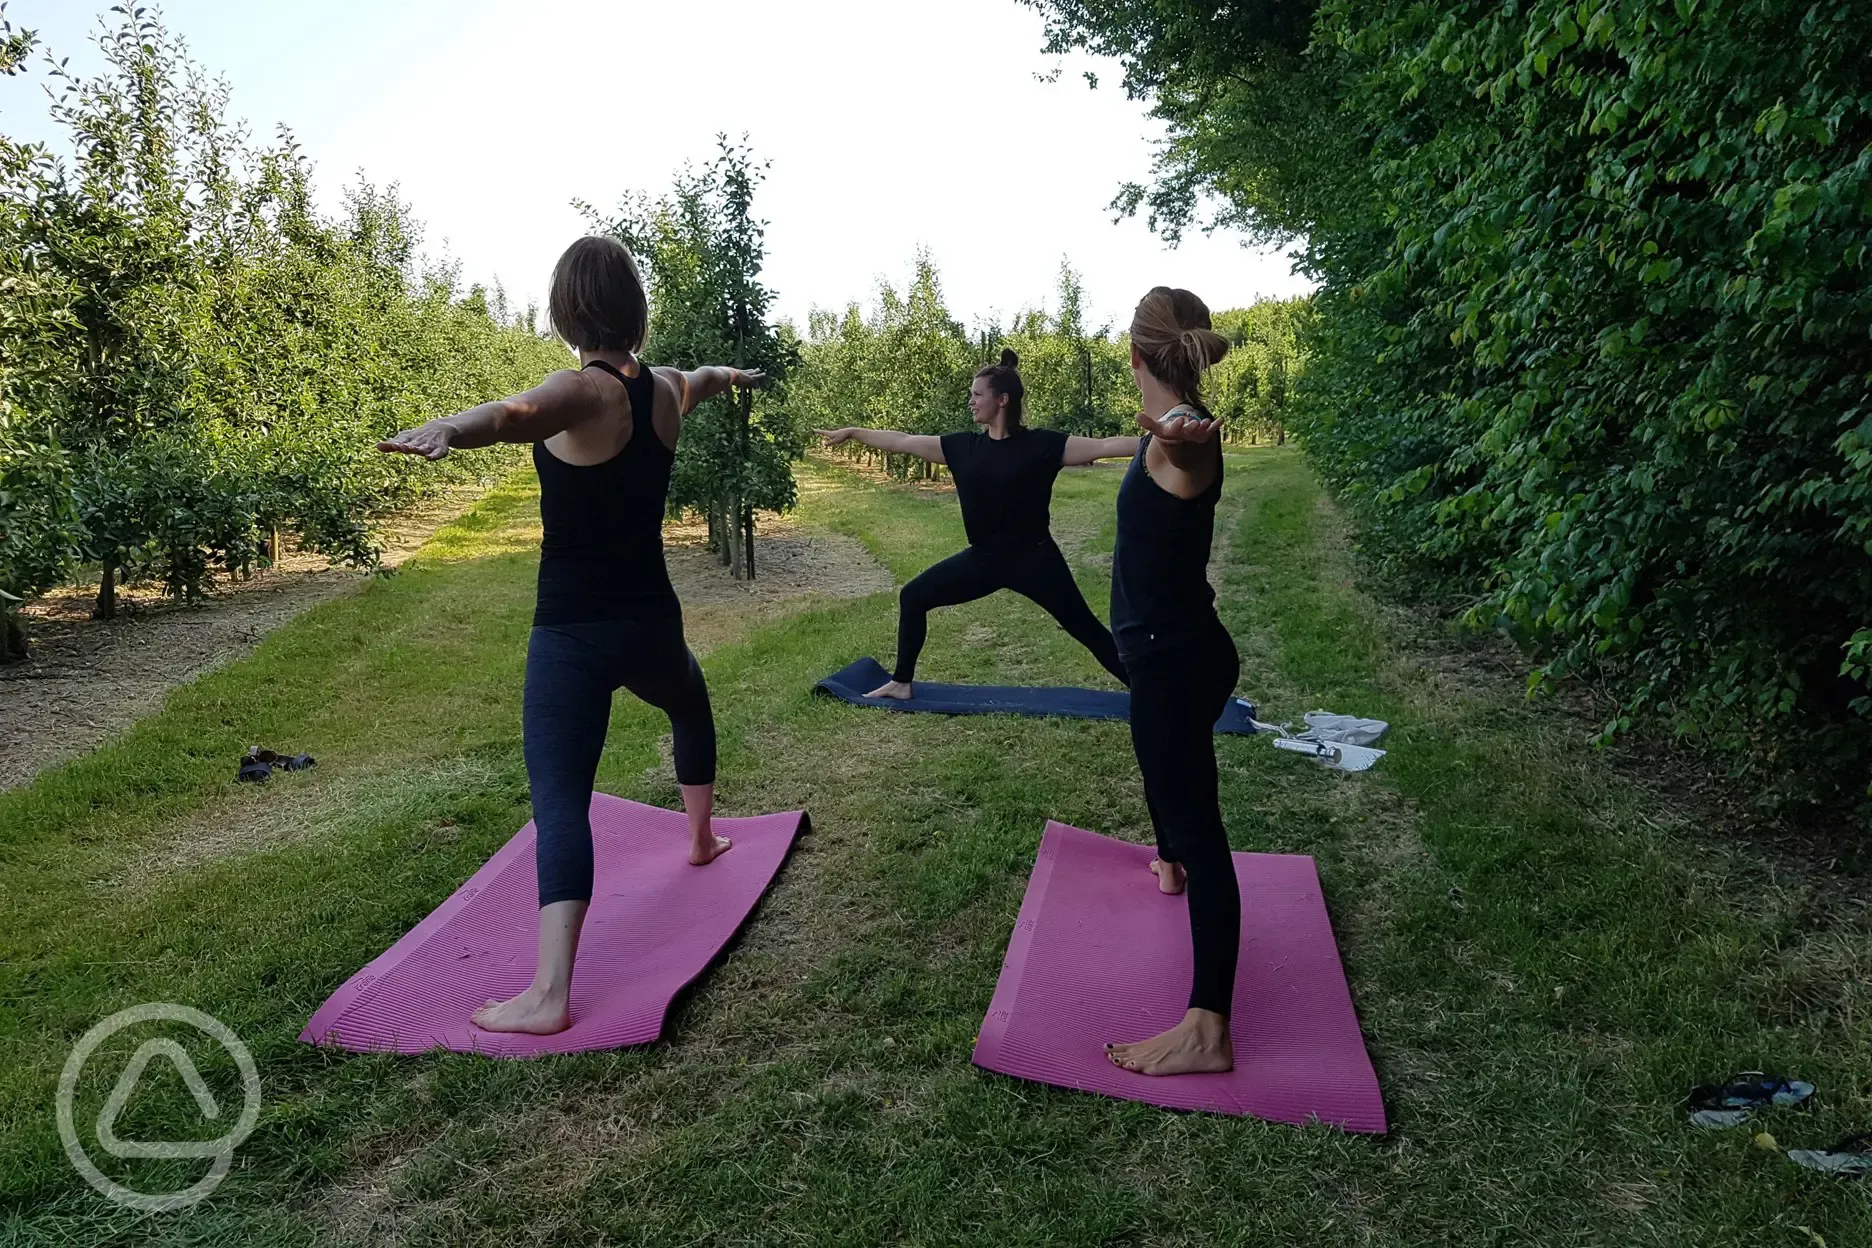 Yoga sessions on weekends for adults and kids